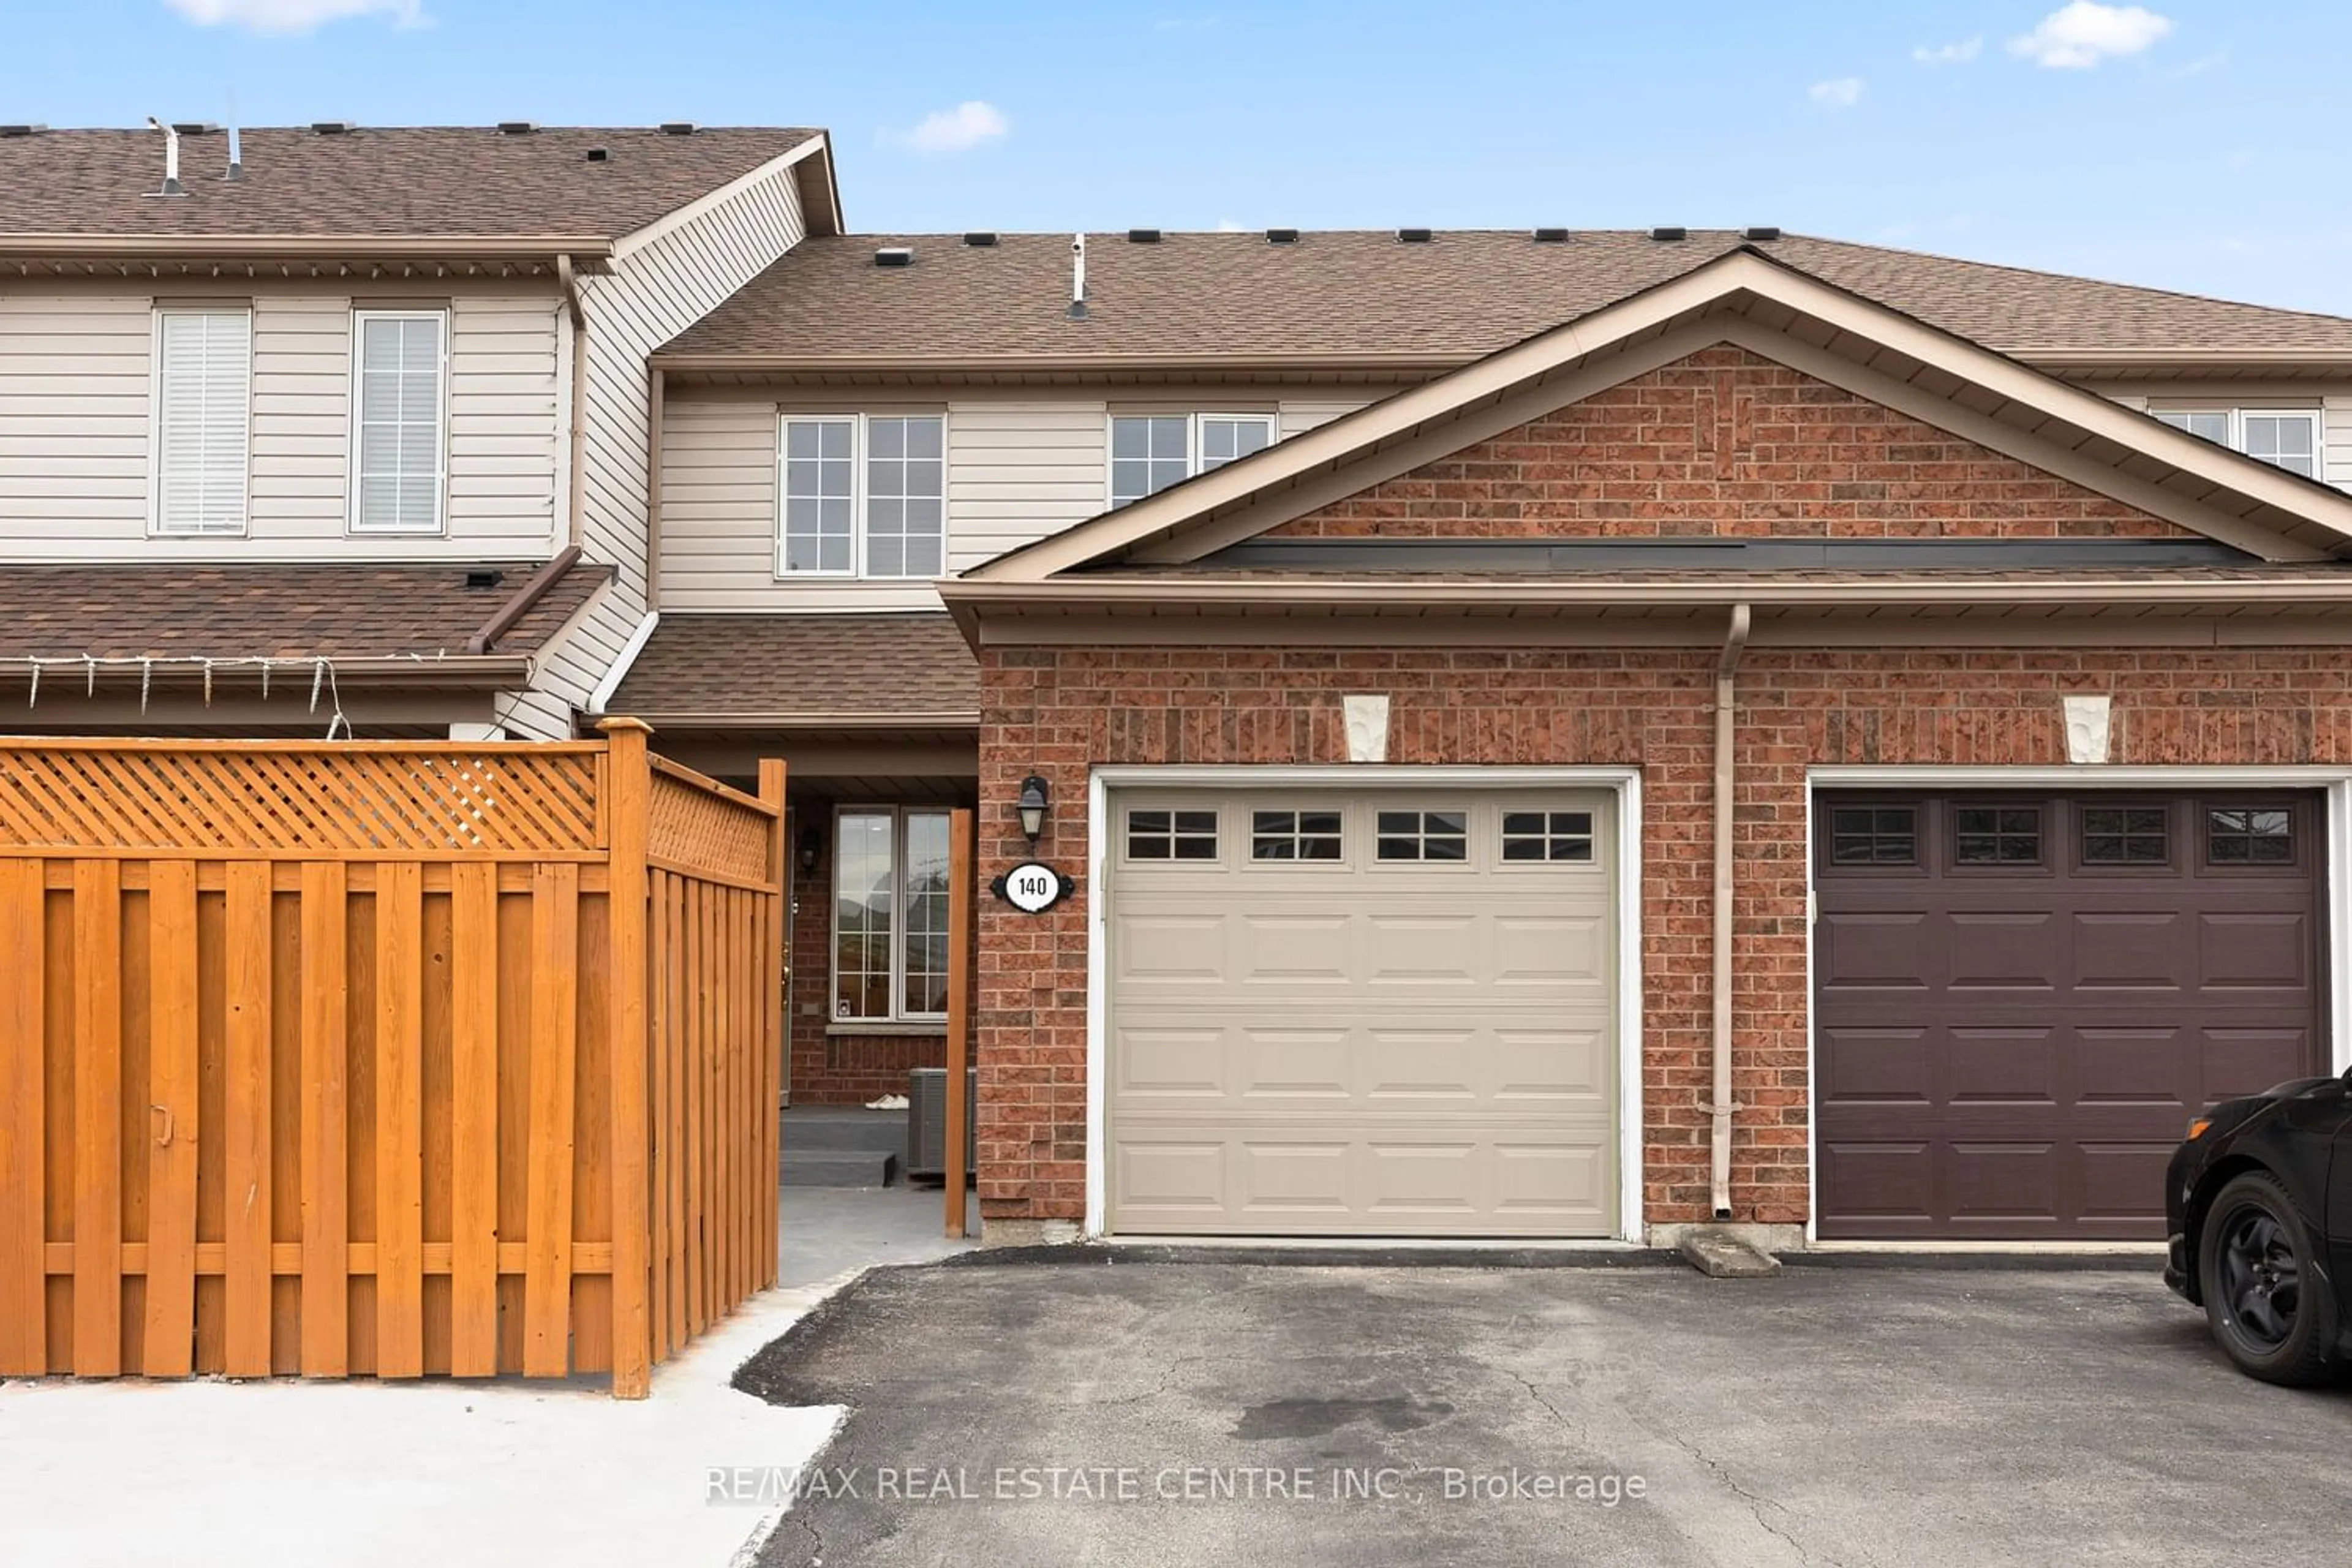 Home with brick exterior material for 140 Manley Lane, Milton Ontario L9T 5N9